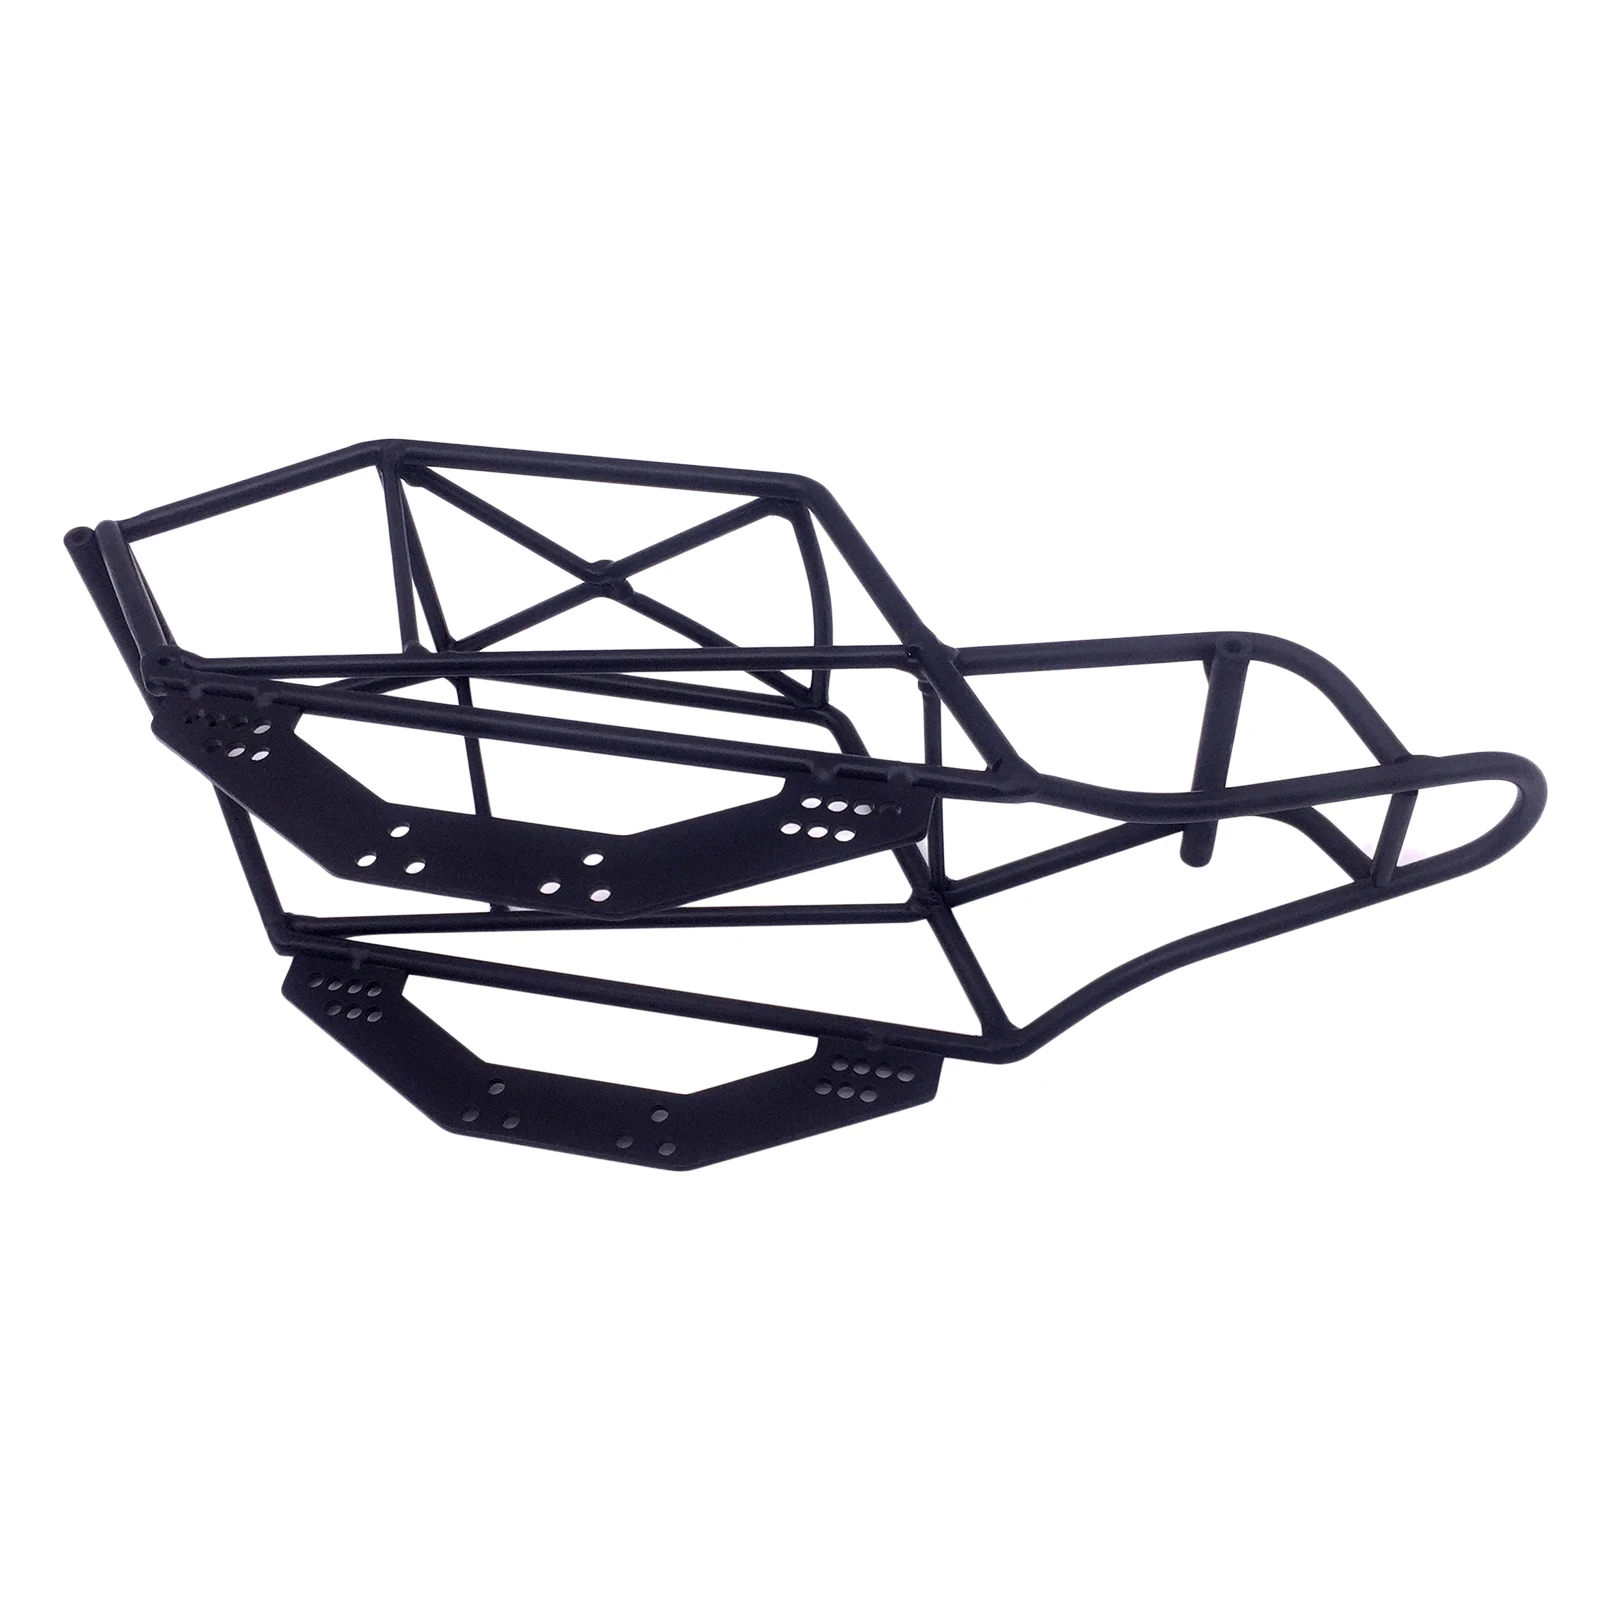 RC Roll Cage Metal Roll Cage Full Tube Frame Body Chassis Parts for 1/10 Axial SCX10 90022 90027 RC Rock Car RC Crawler Truck